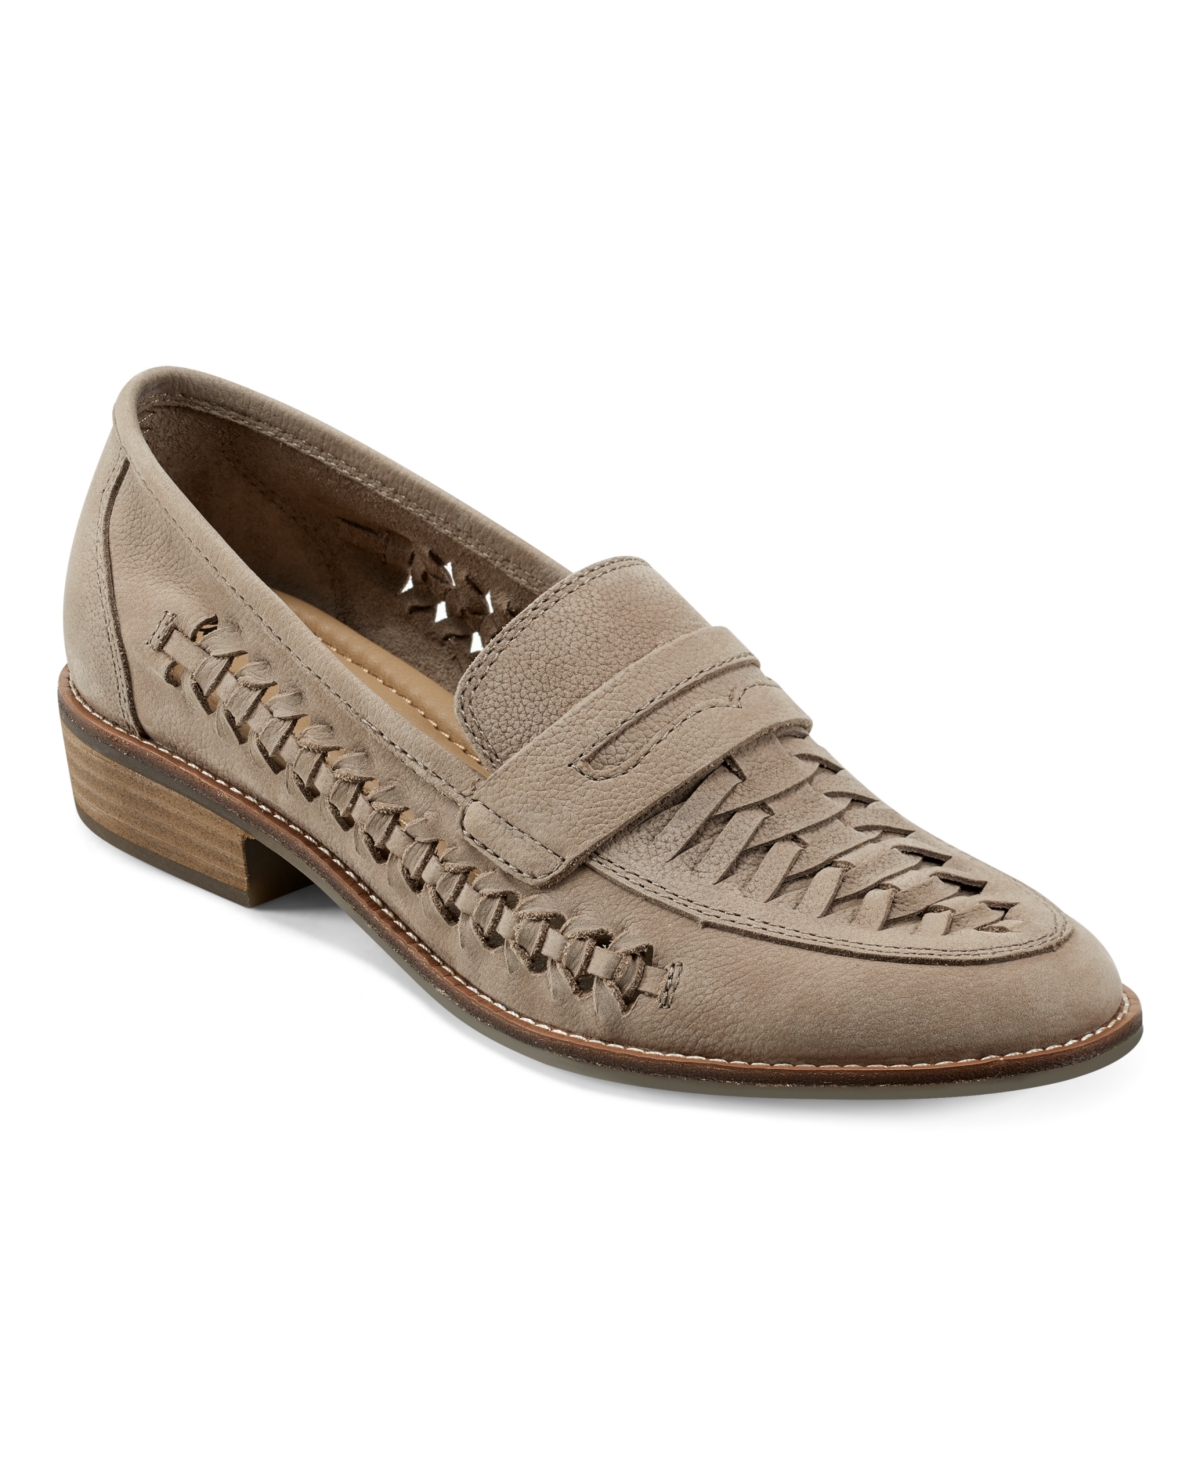 Earth Women's Ella Round Toe Slip-On Casual Flat Loafers - Taupe Nubuck